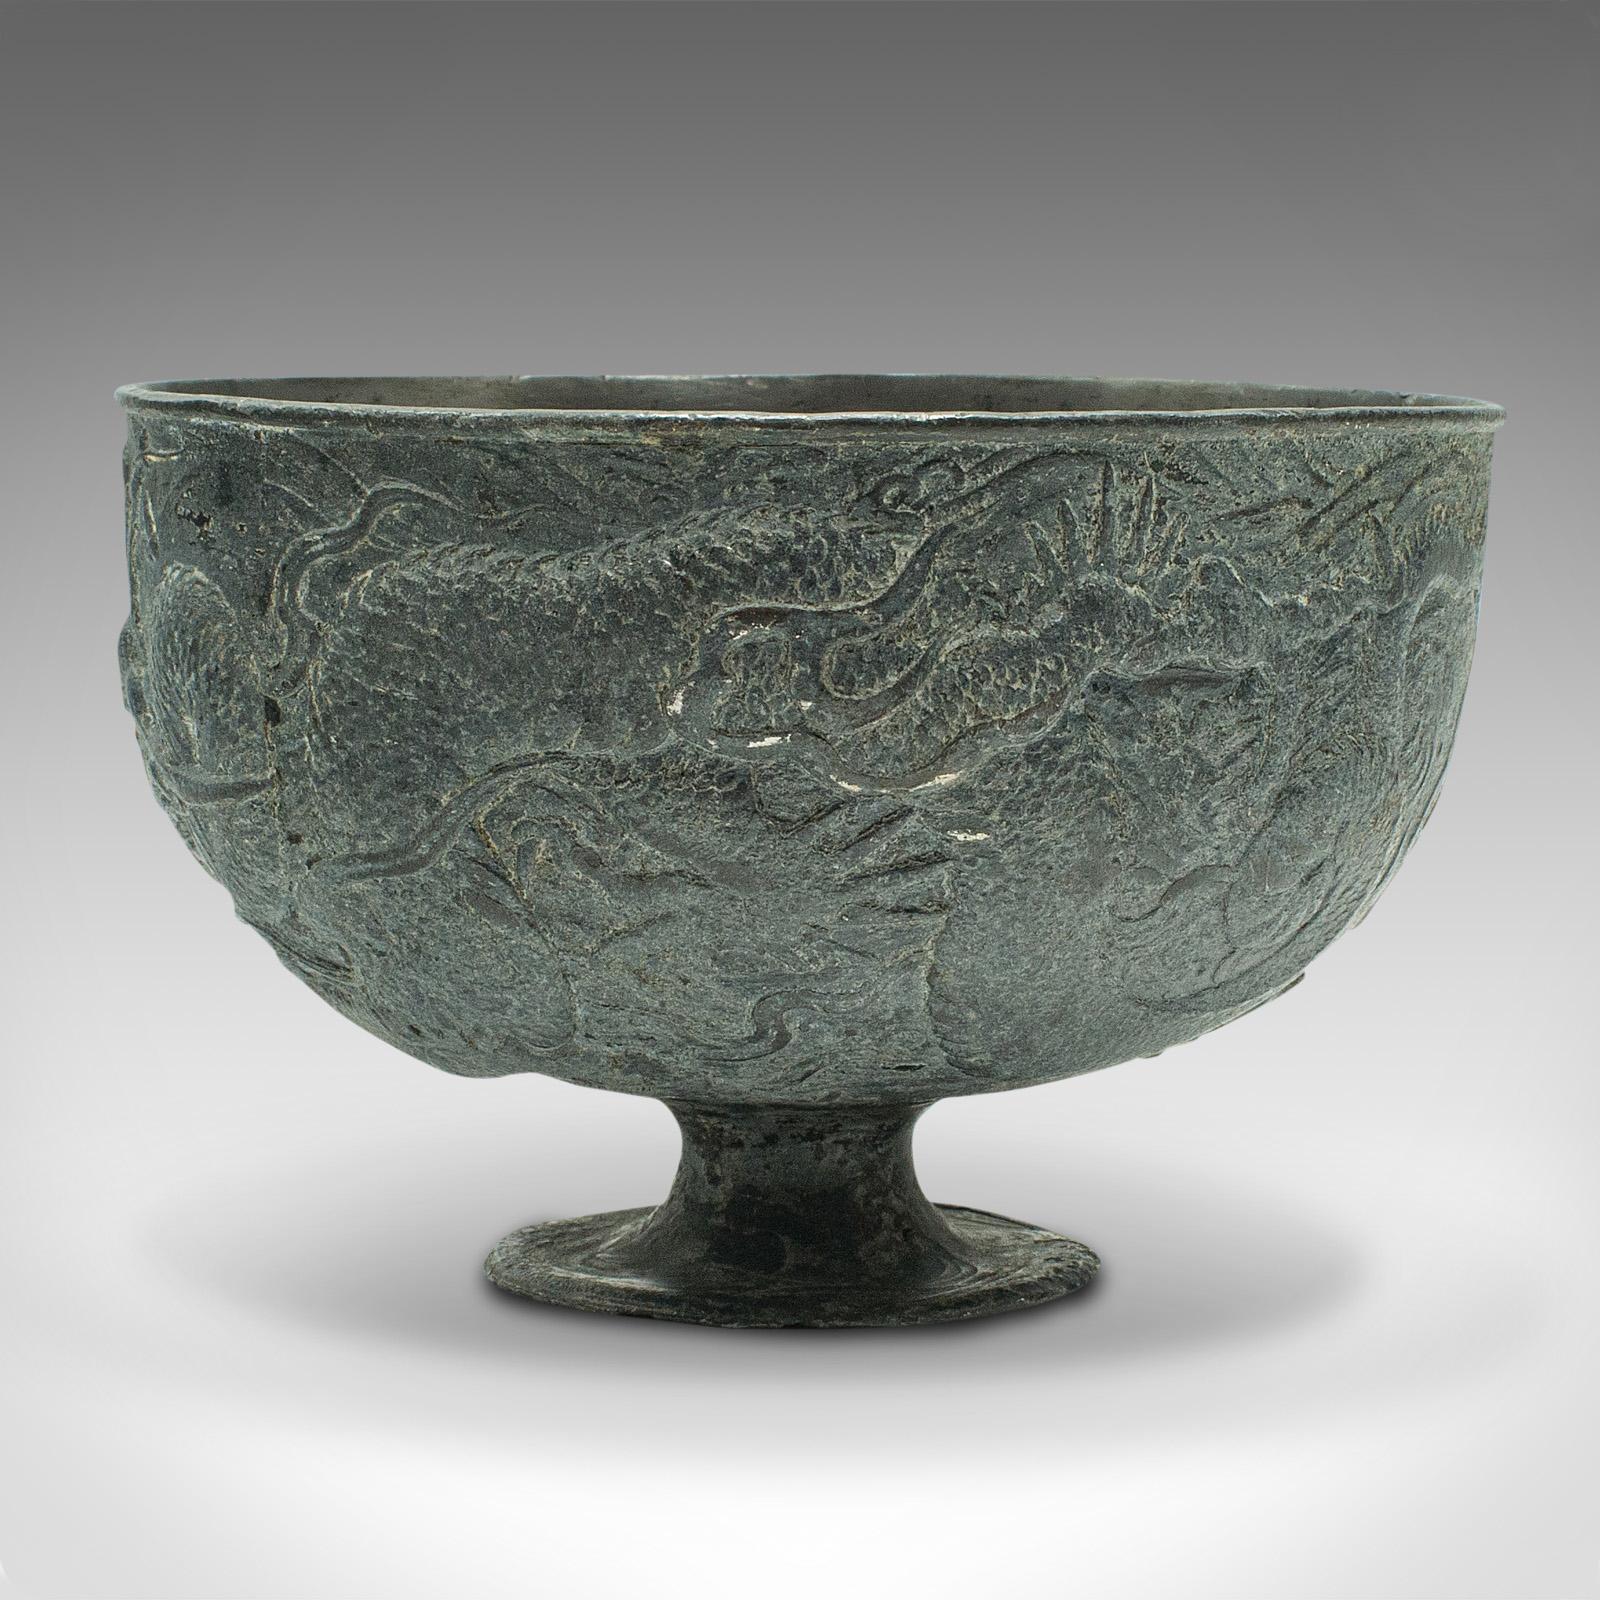 Other Antique Libation Cup, Chinese, Lead Alloy, Decorative Bowl, Victorian, C.1880 For Sale